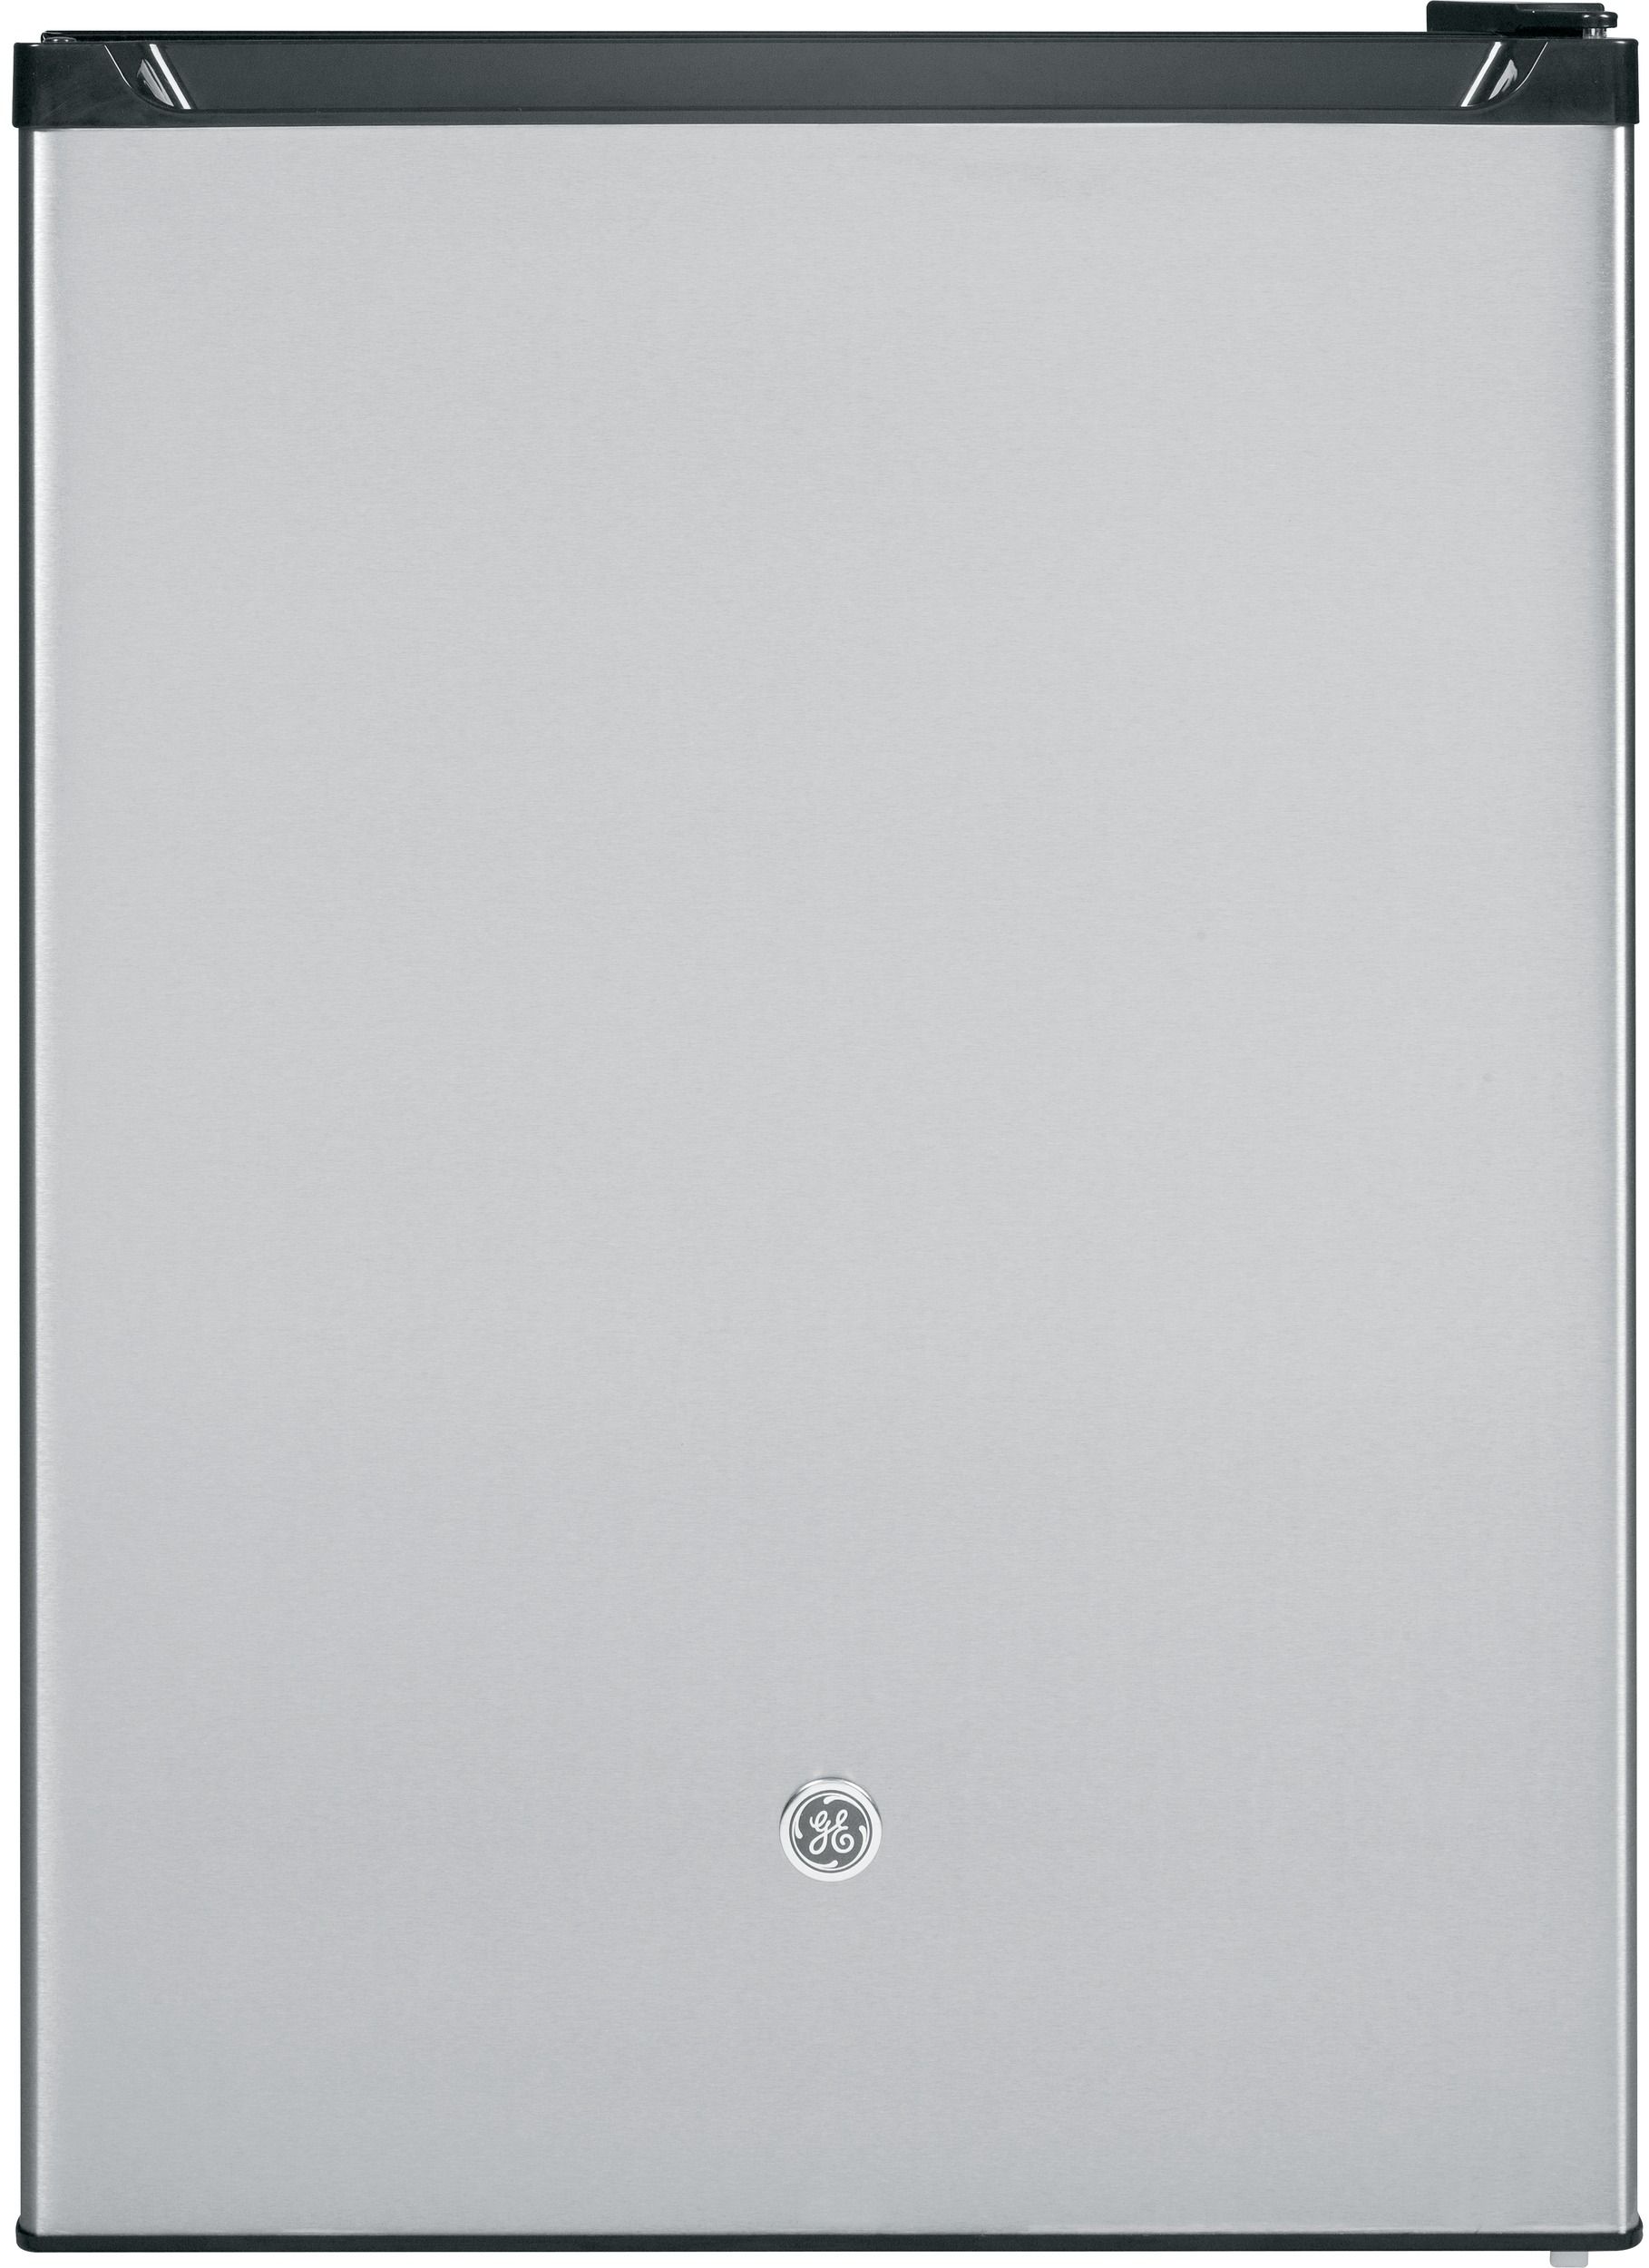 GE® 5.6 Cu. Ft. Stainless Steel Compact Refrigerator